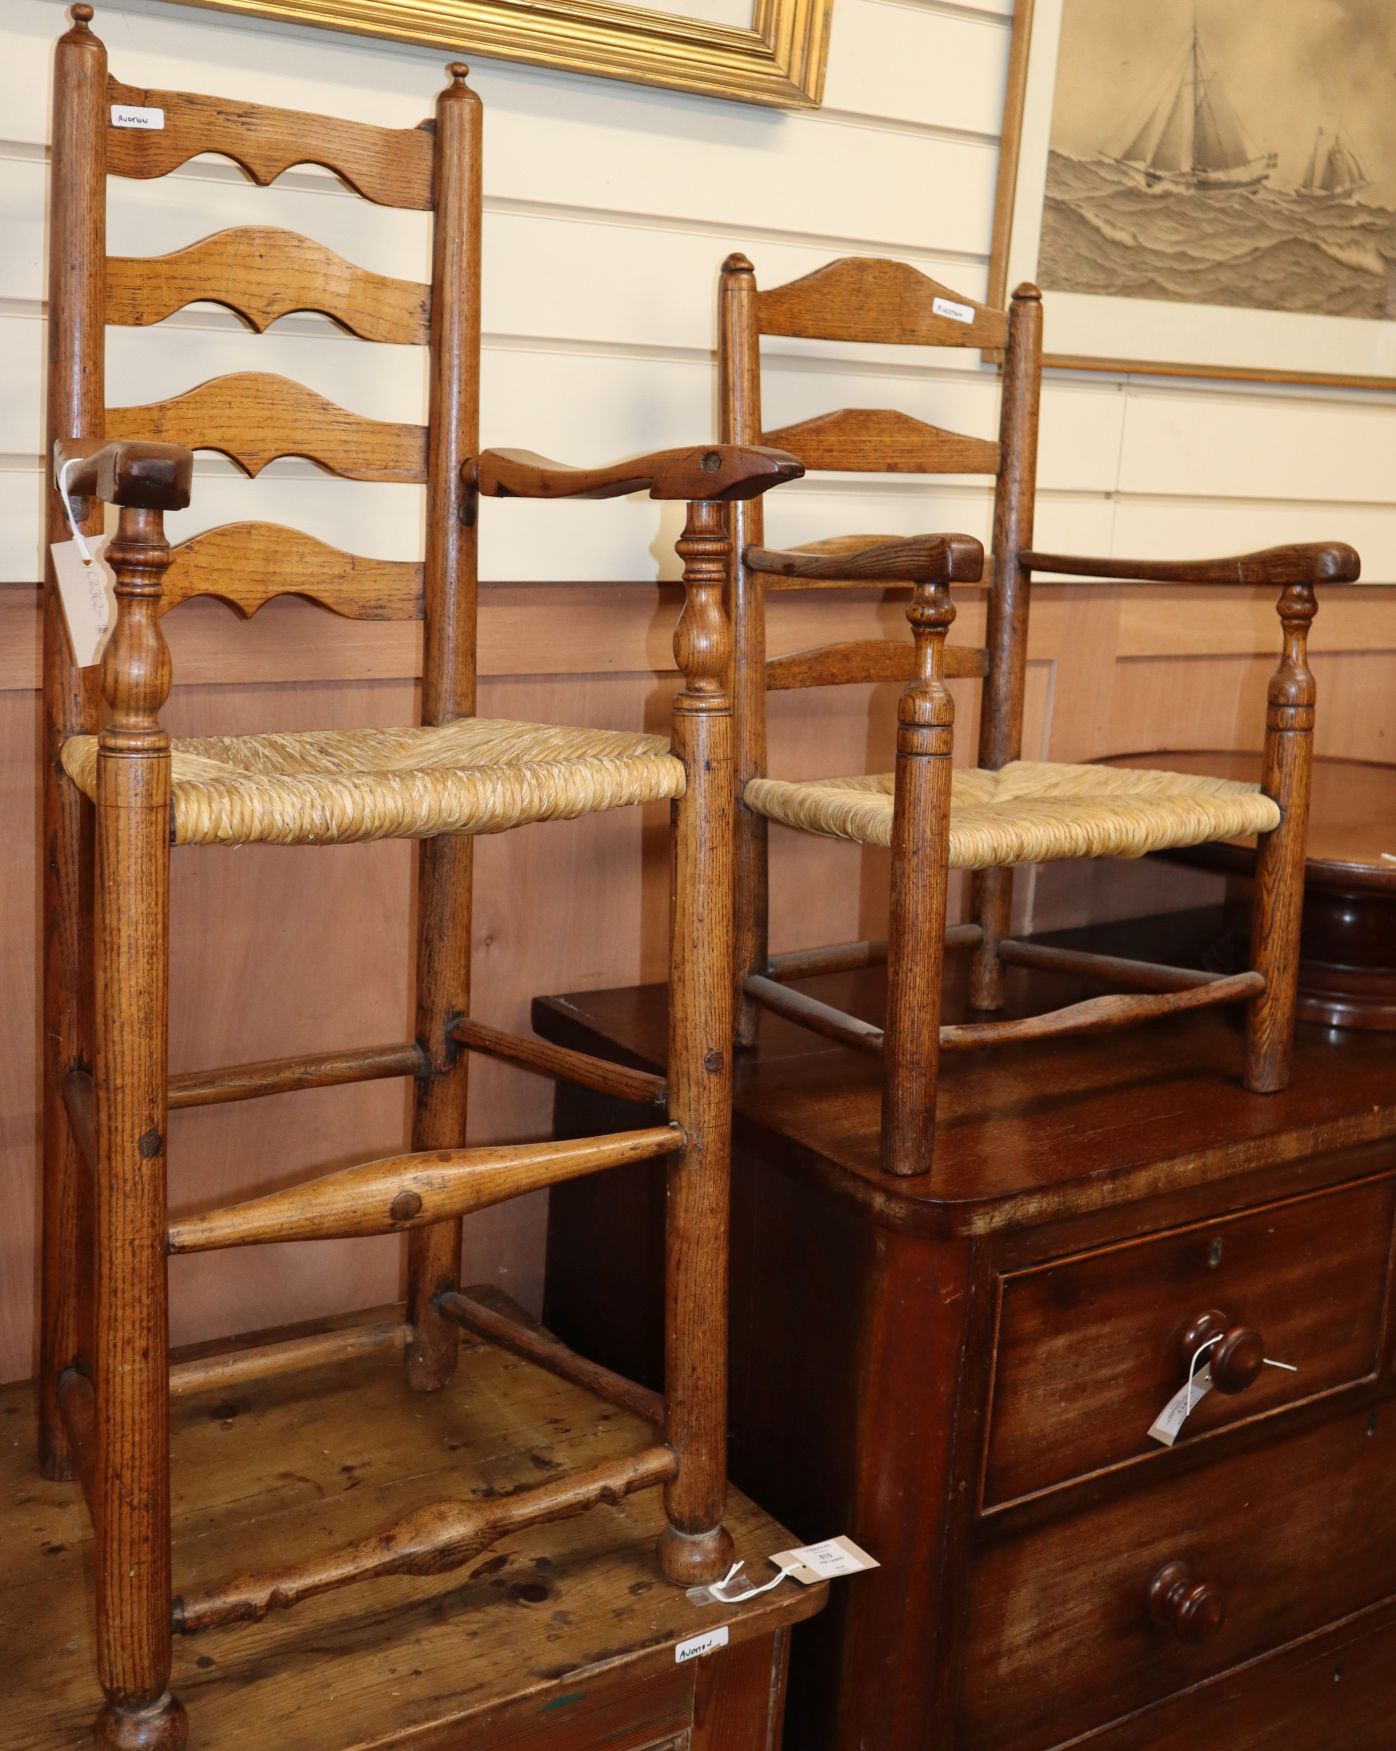 A single ladderback child's chair and a child's chair